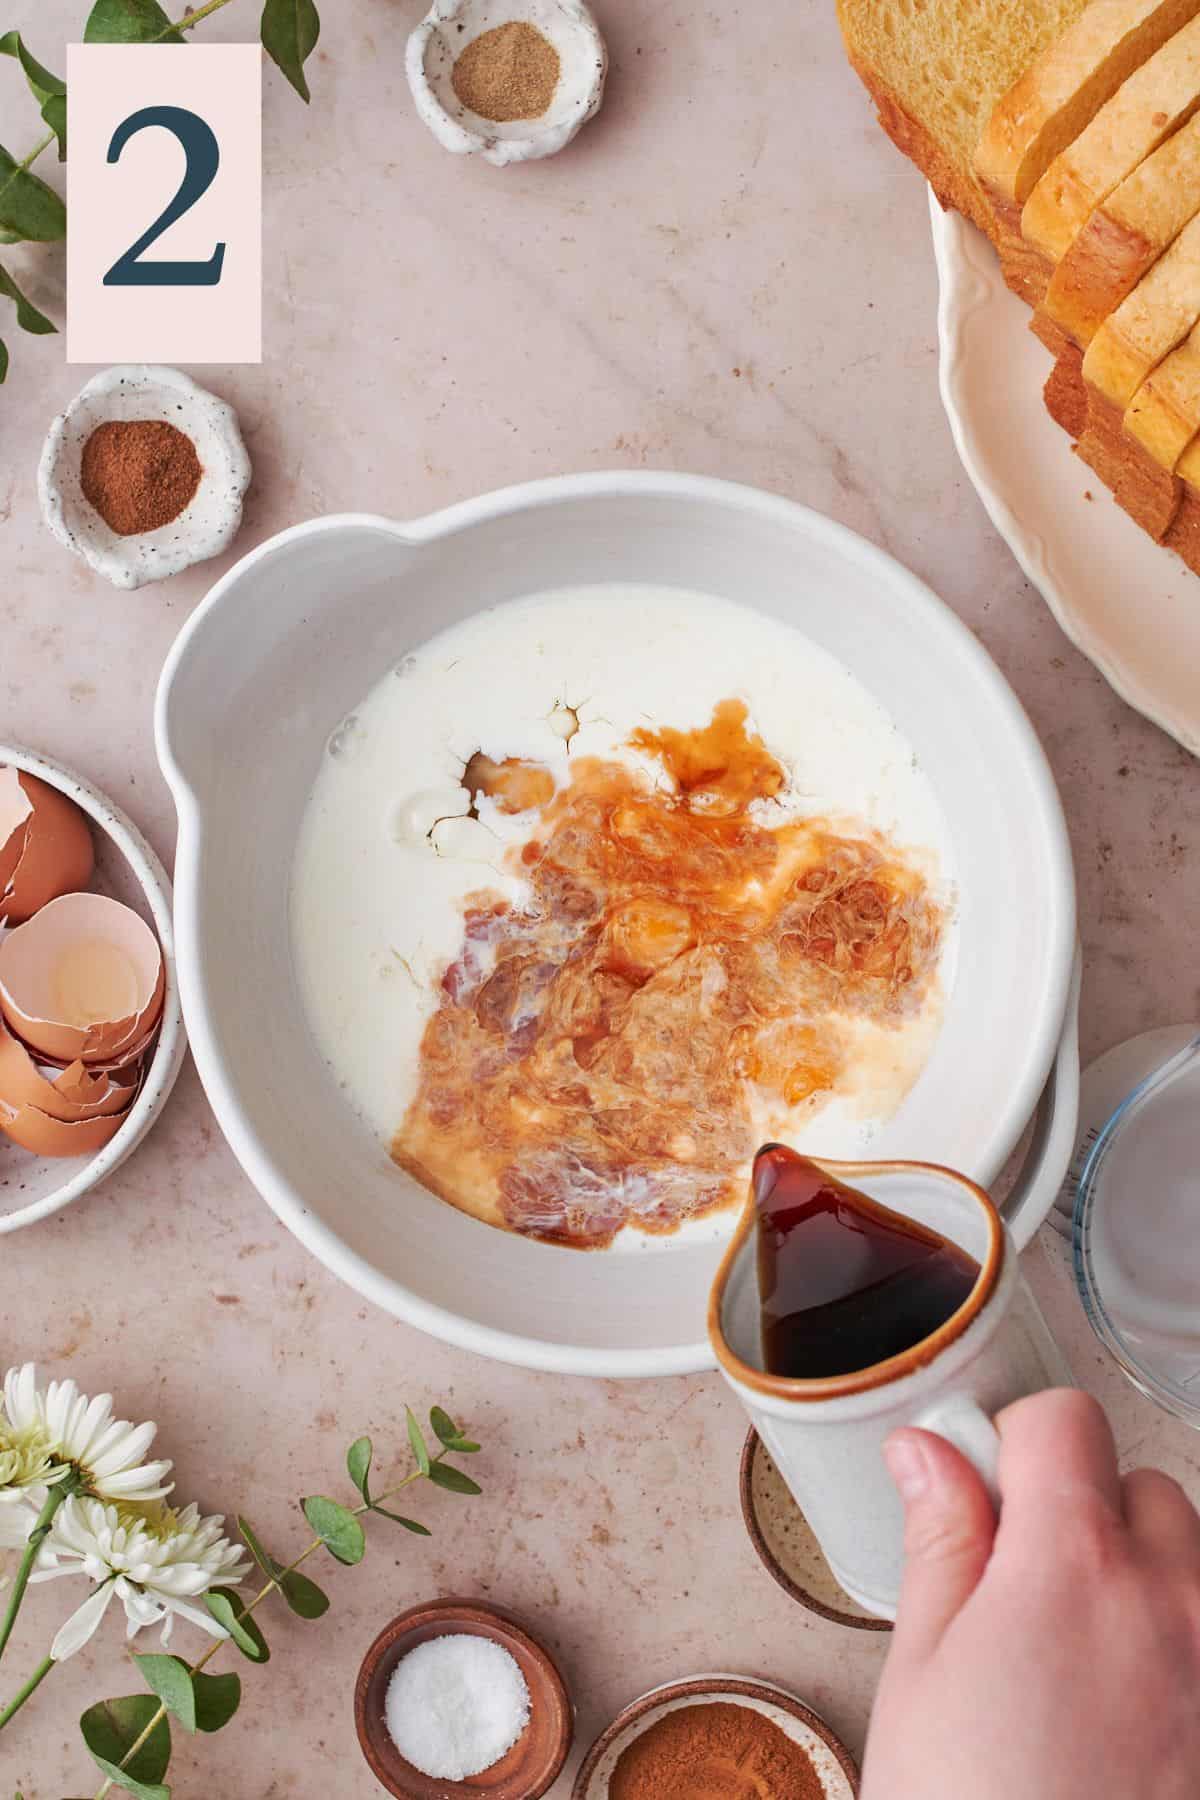 milk, eggs, and vanilla in a large bowl, with a hand pouring maple syrup into the bowl. 